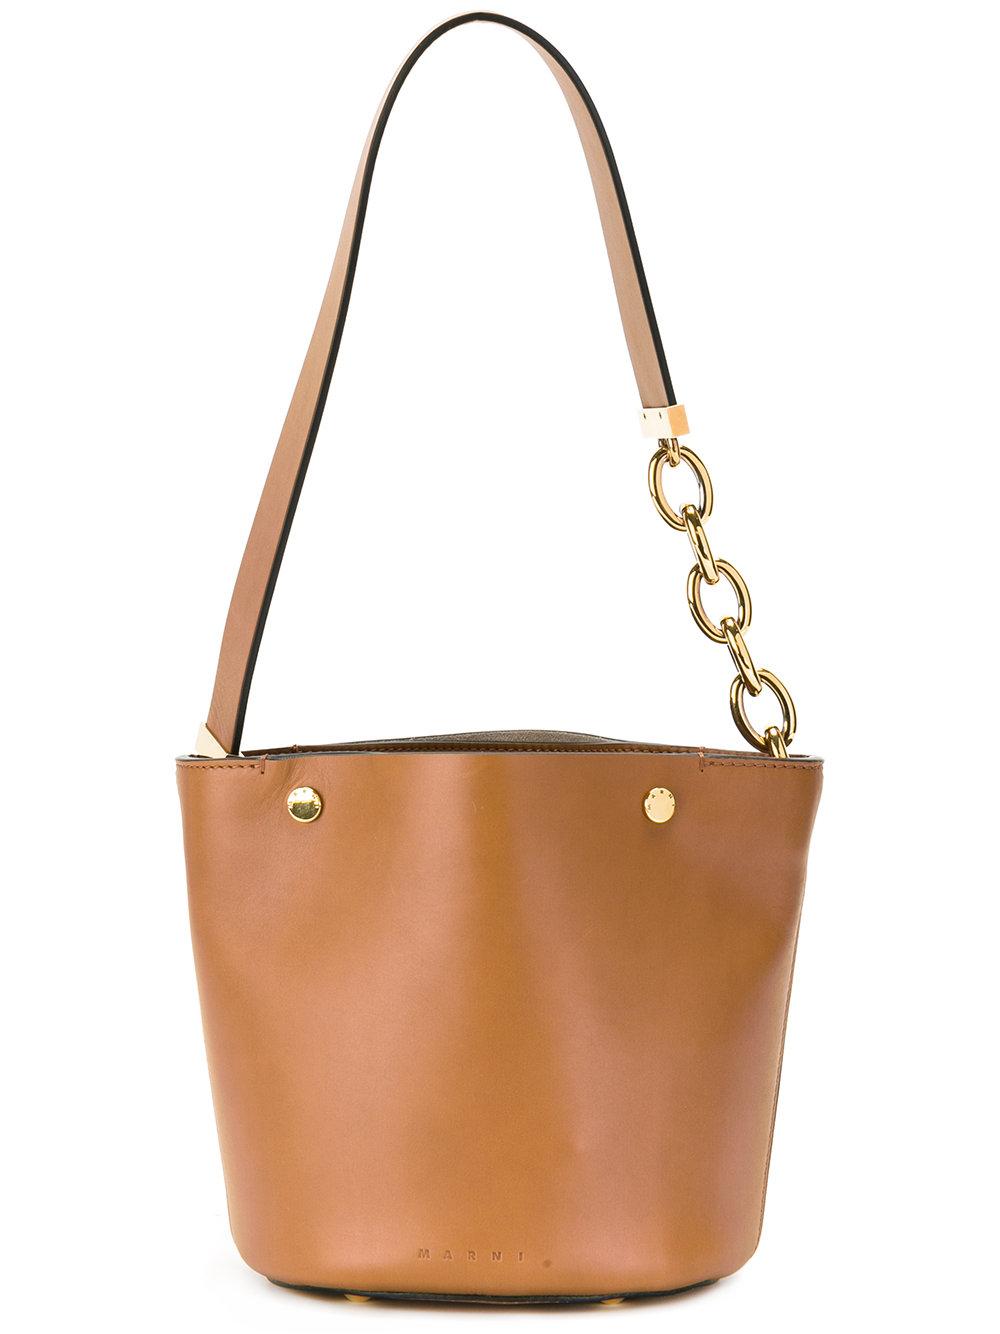 Marni Leather Bucket Tote Bag in Brown - Lyst